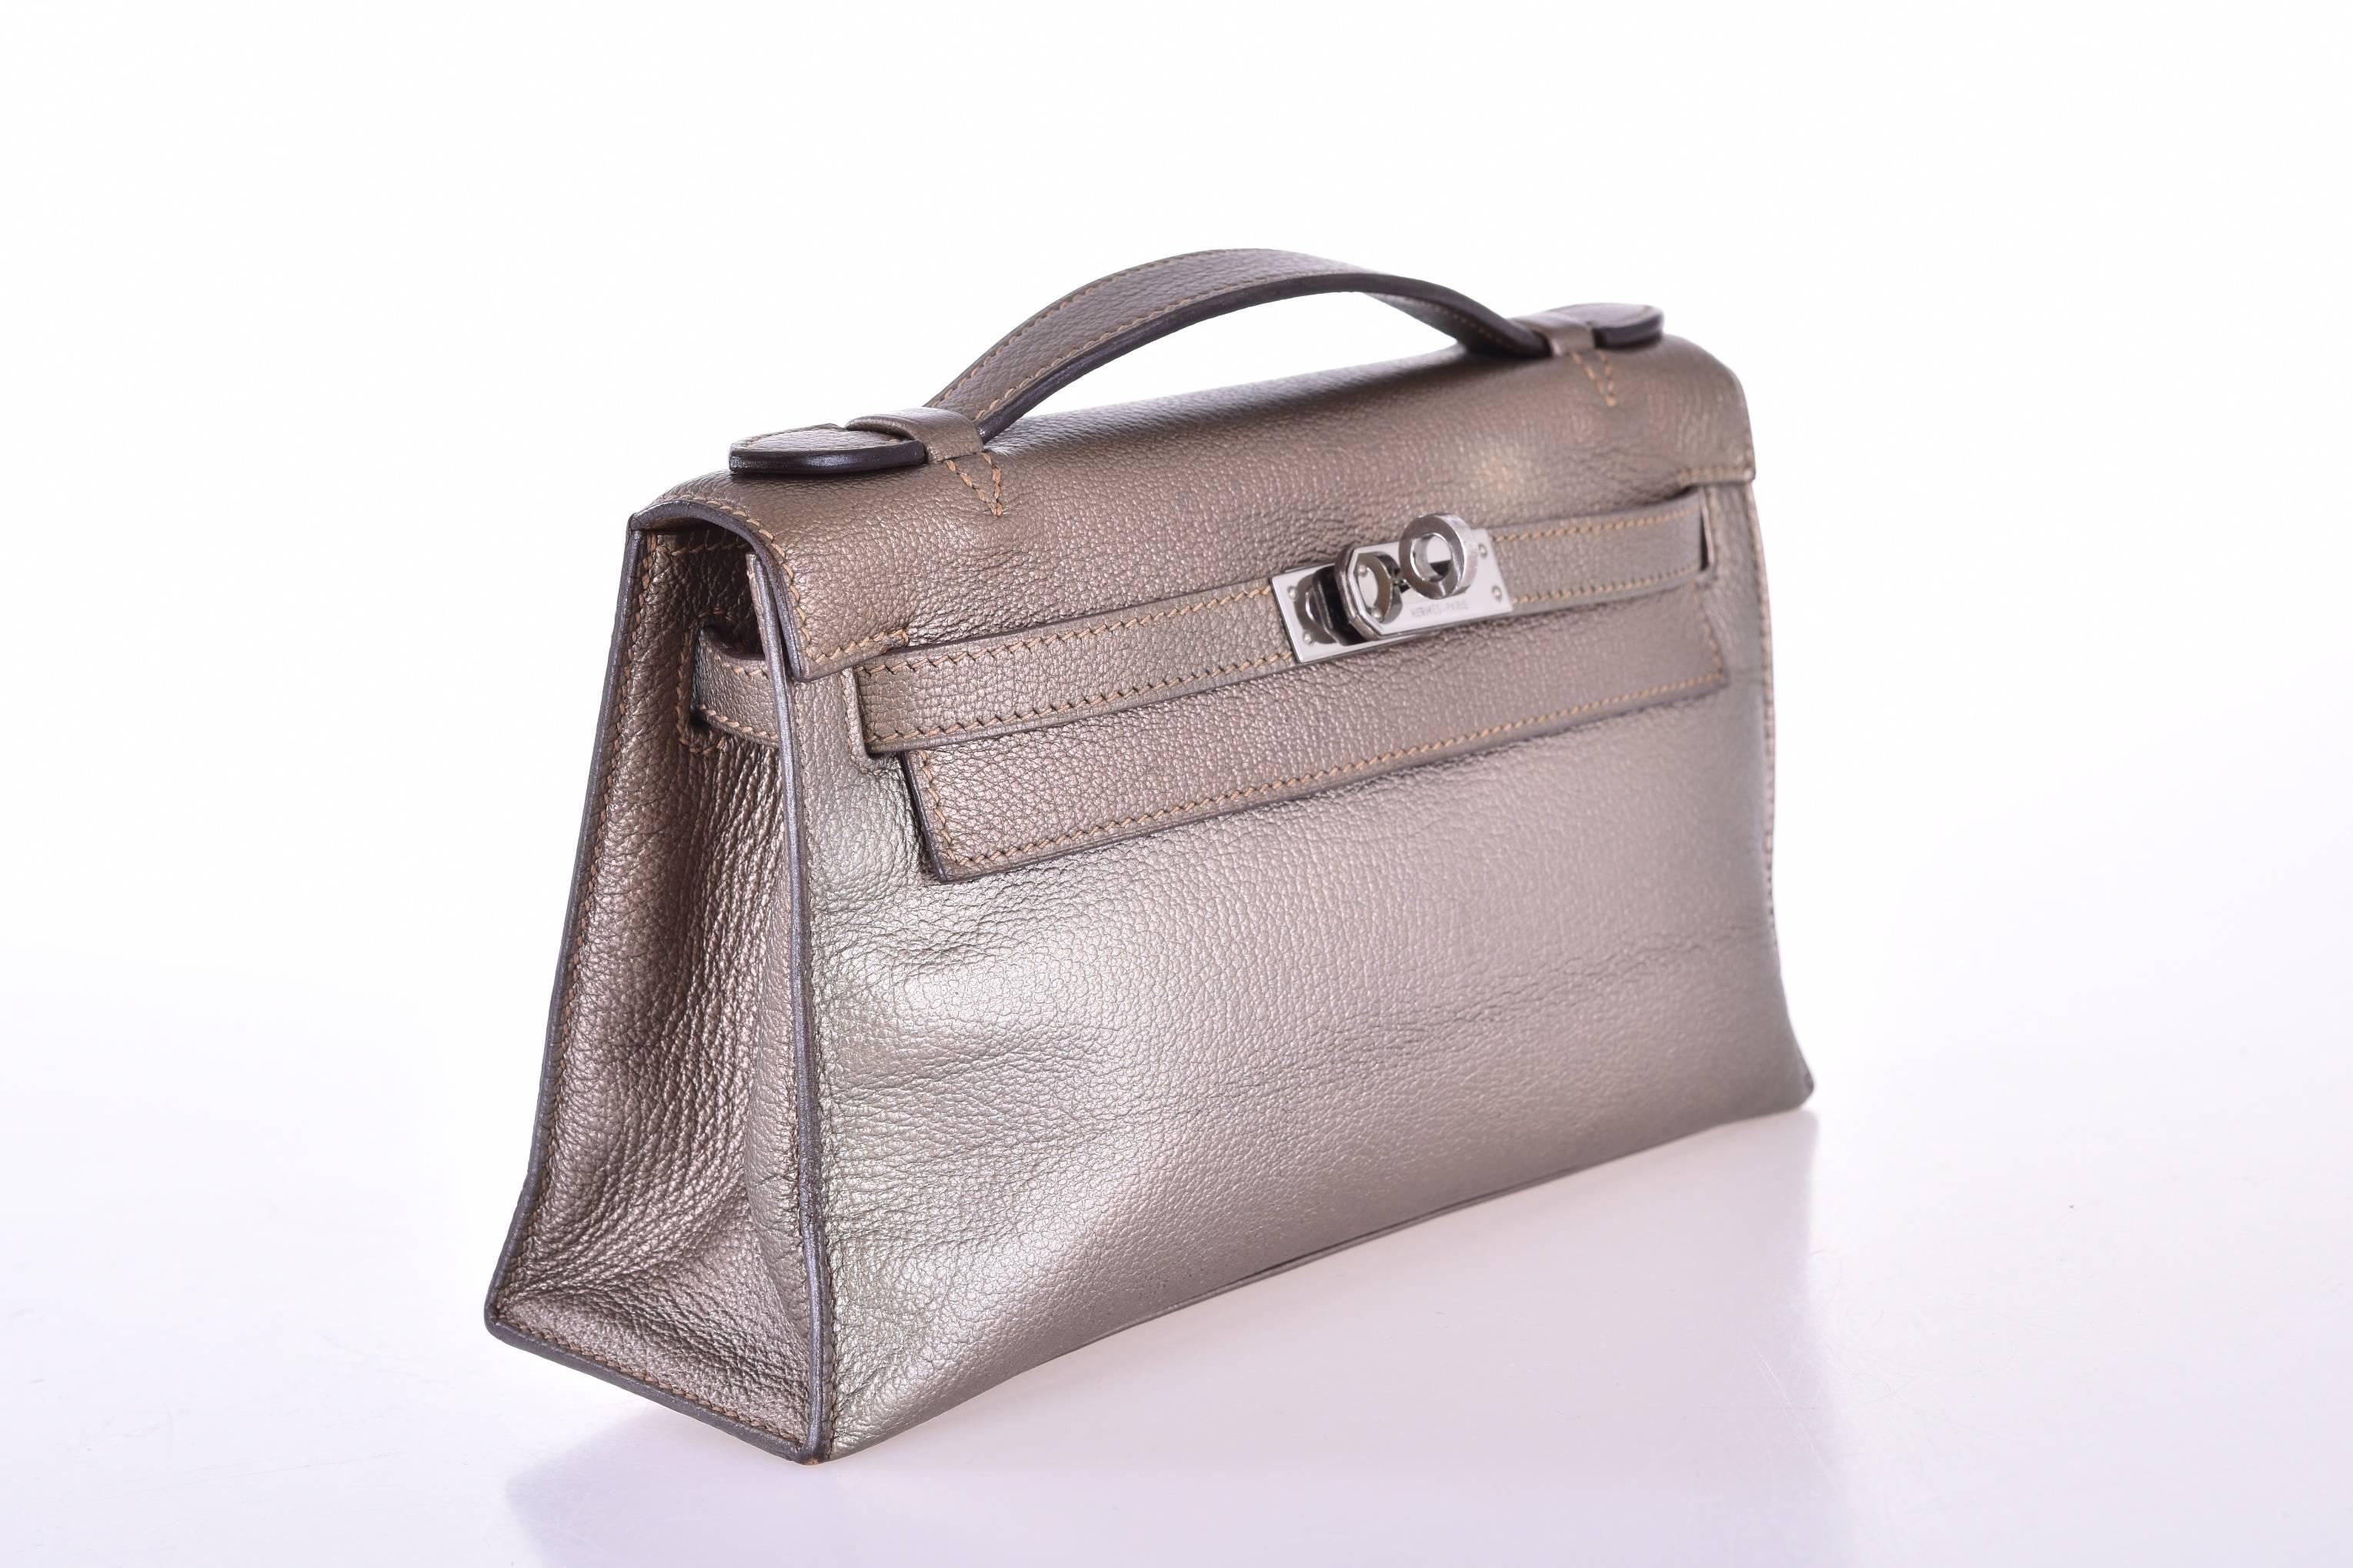 Condition - GOOD
Hermes Kelly Pochette Clutch Bronze confetti Palladium Hardware

Hardware: Palladium
Country of Origin: France
Color: bronze
Closure: Toggle
Handle Drop (in inches): 1
Height (in inches): 5.5
Width (in inches): 8.5
Depth